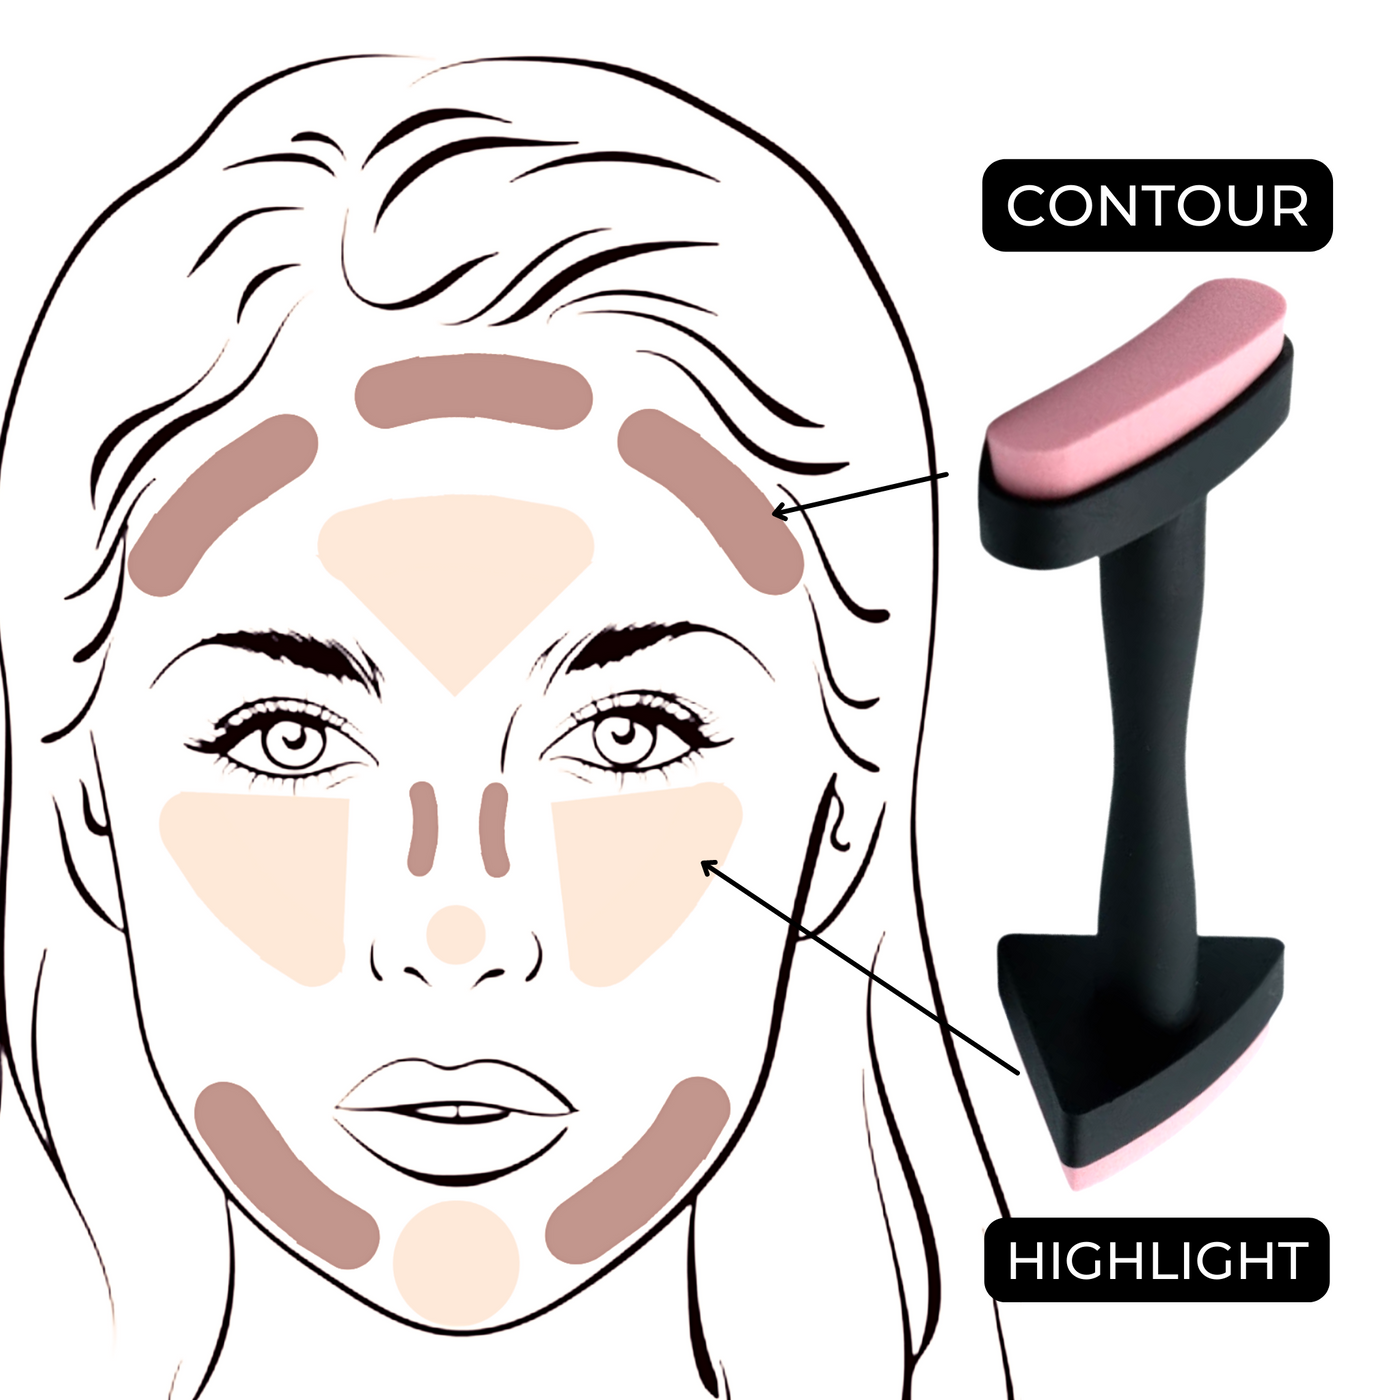 Where To Apply Contour Selection Online